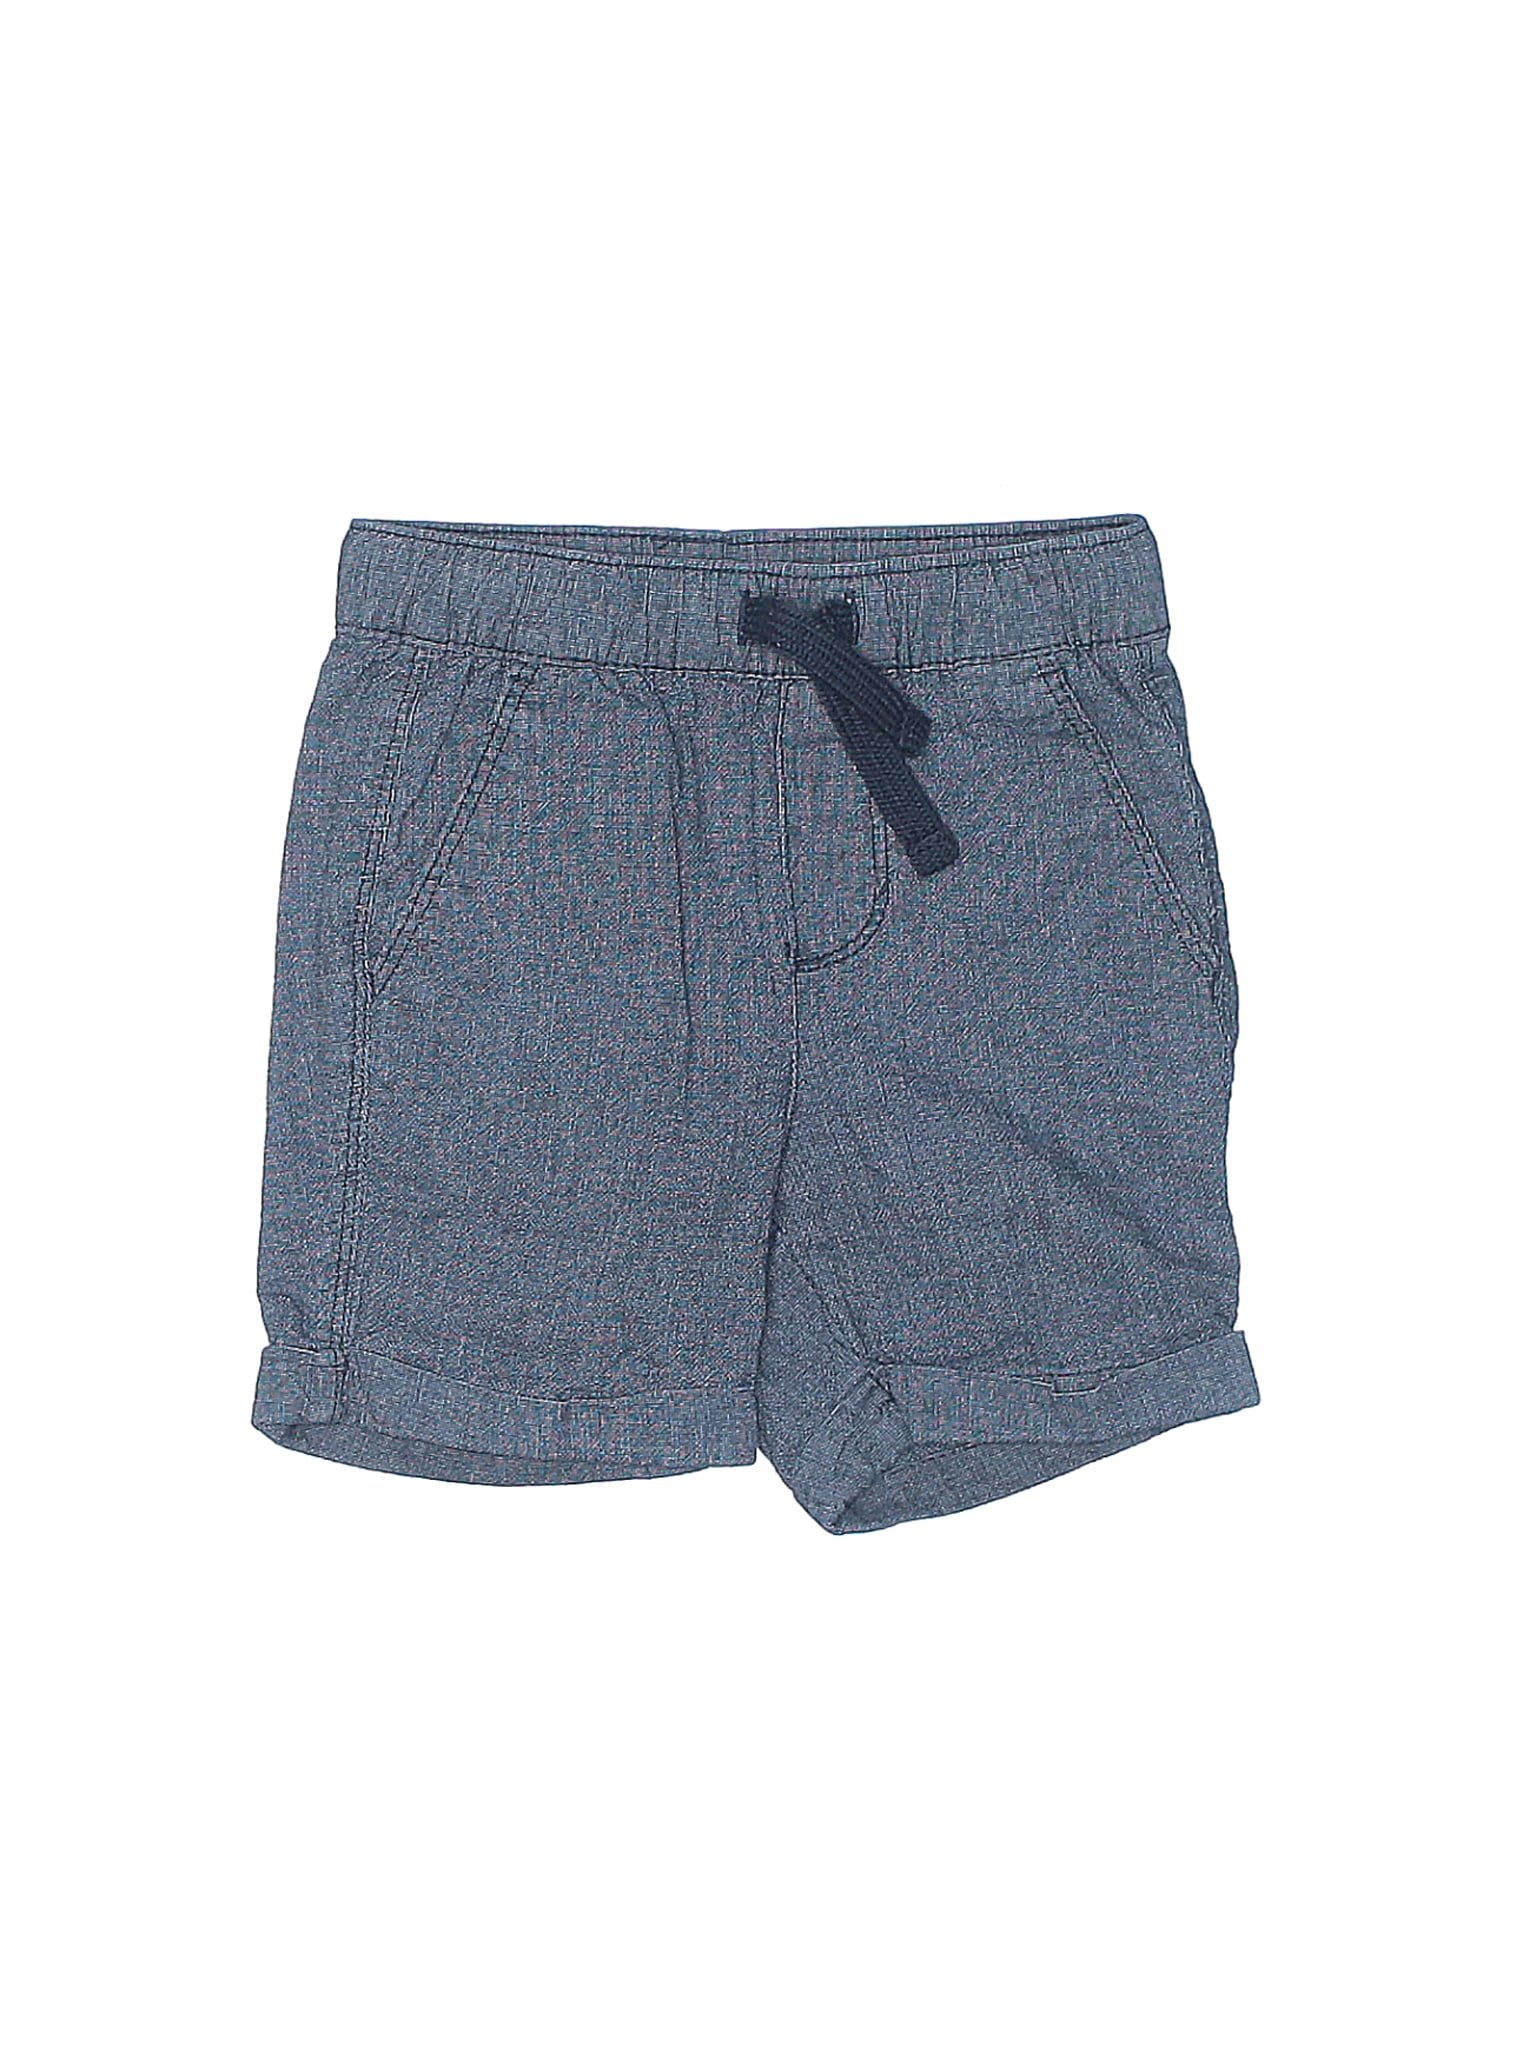 Old Navy - Pre-Owned Old Navy Boy's Size 2T Shorts - Walmart.com ...